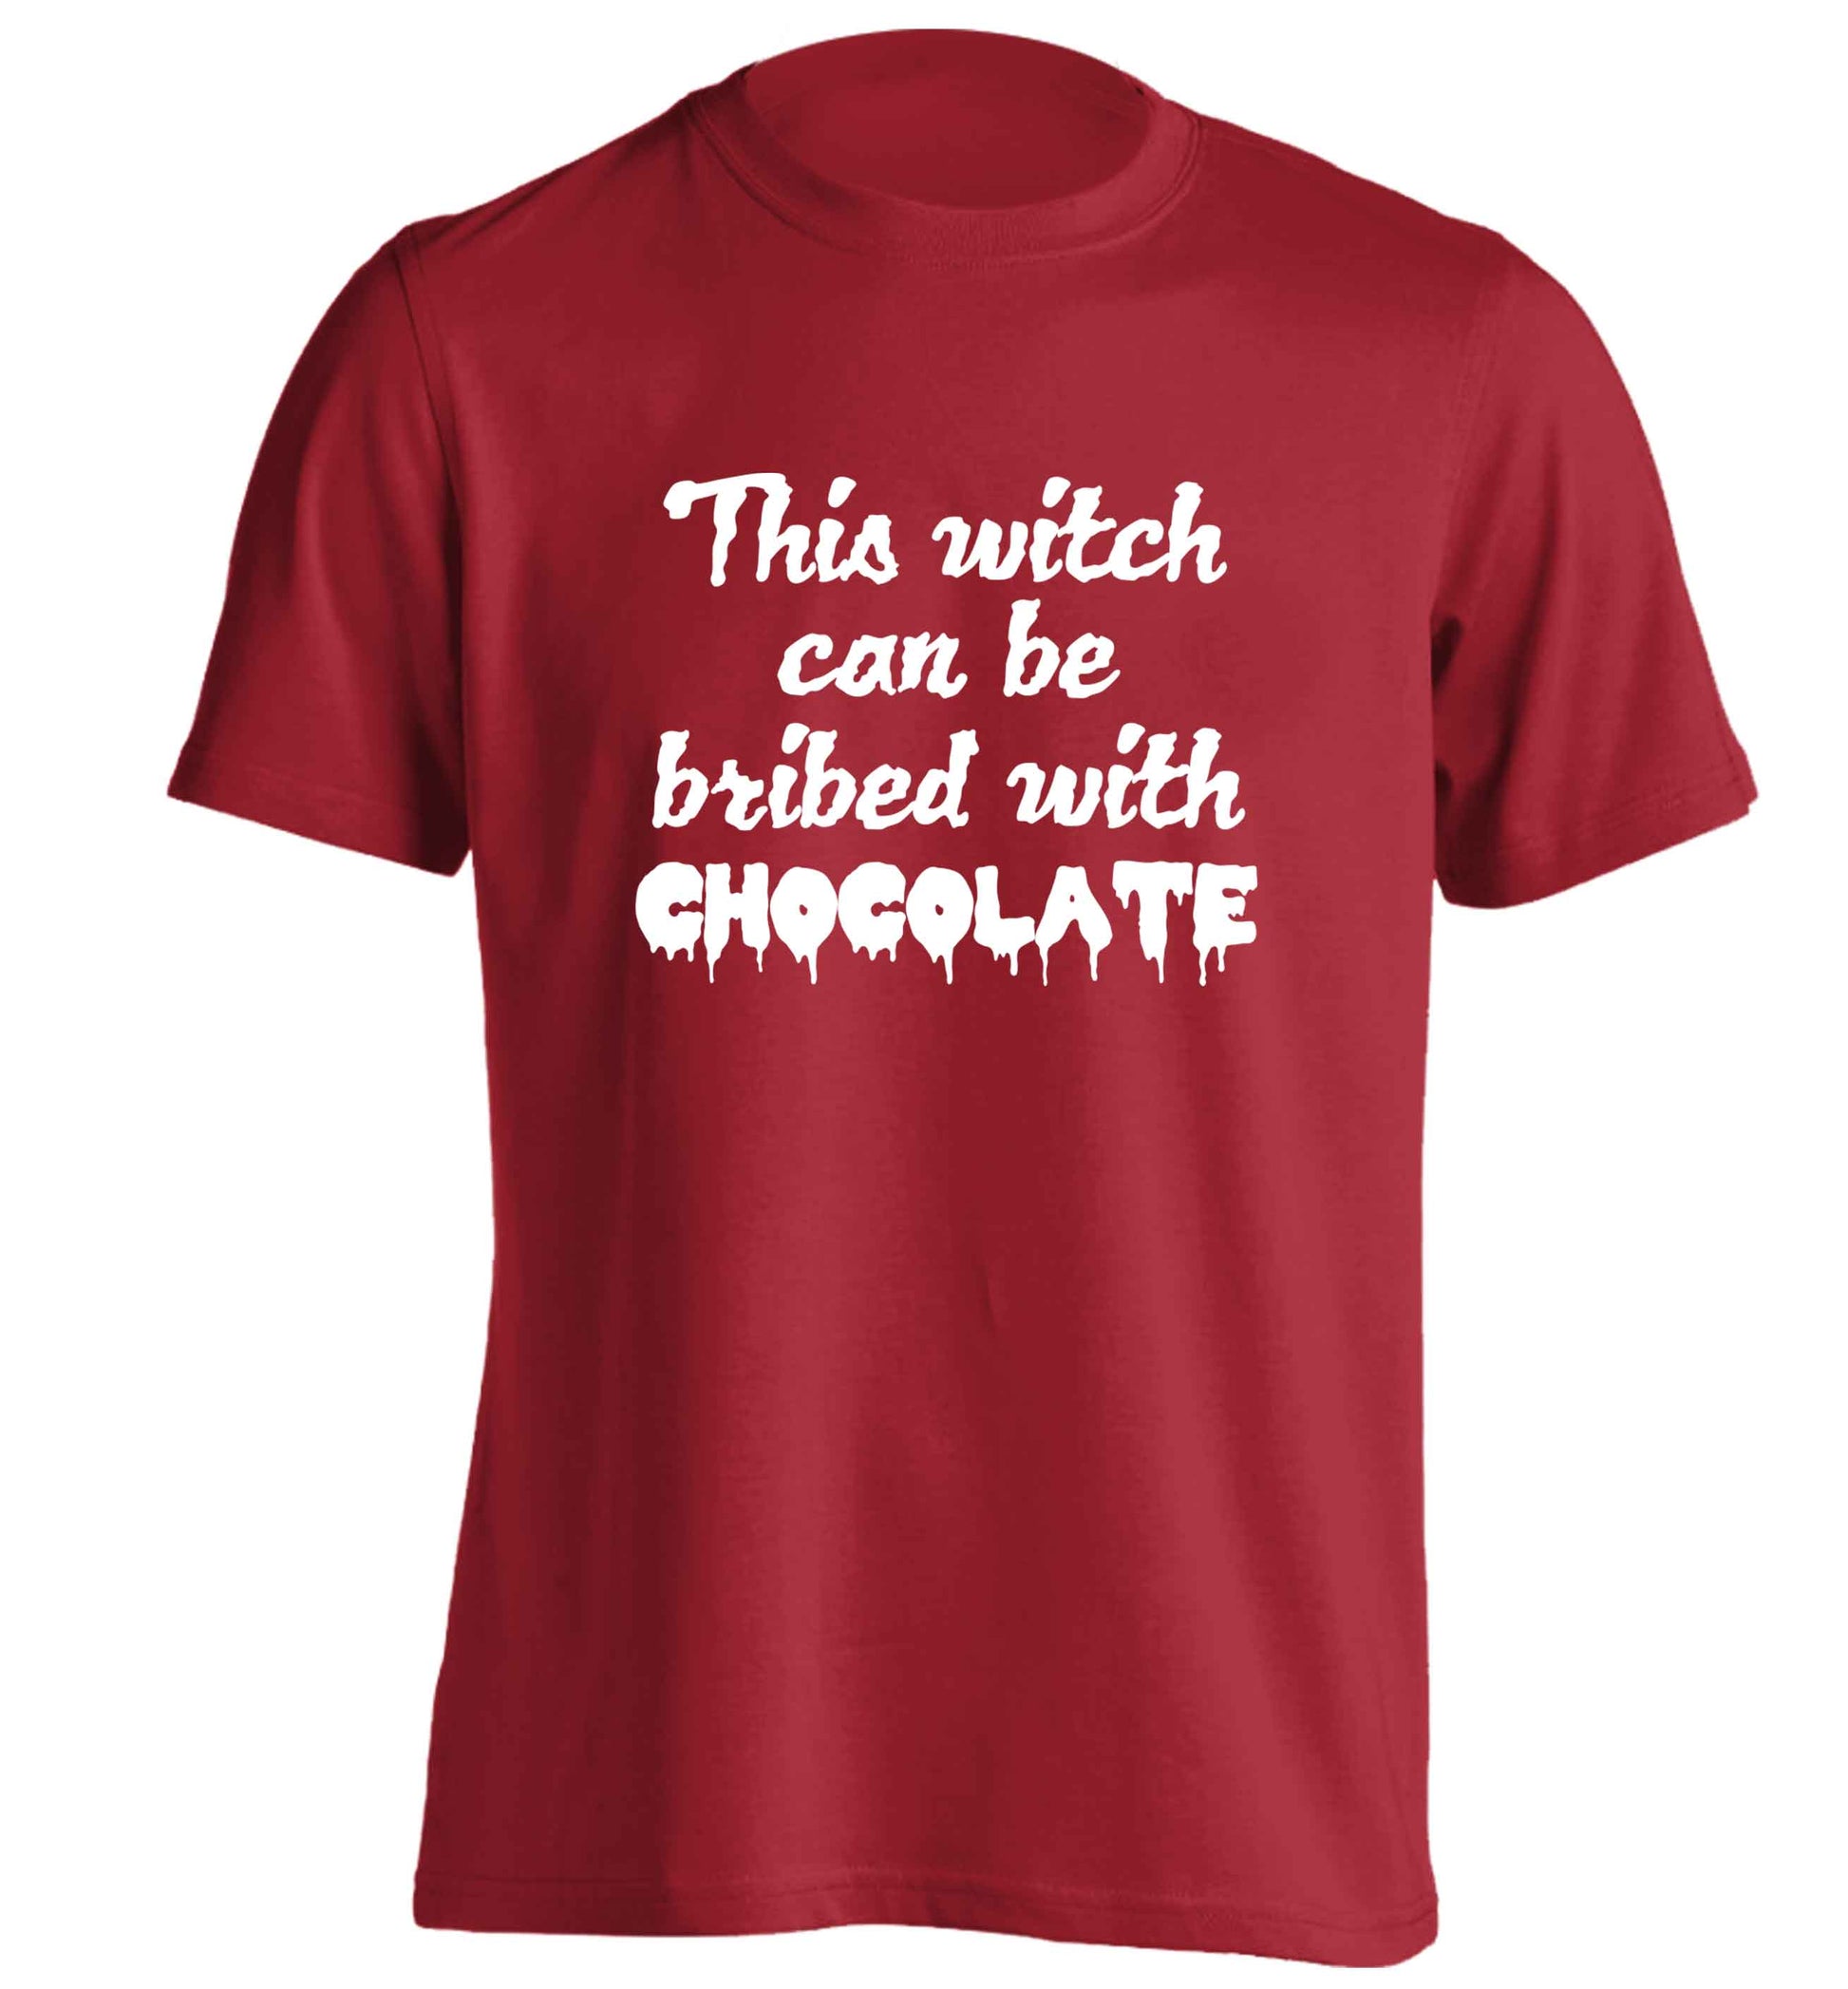 This witch can be bribed with chocolate adults unisex red Tshirt 2XL